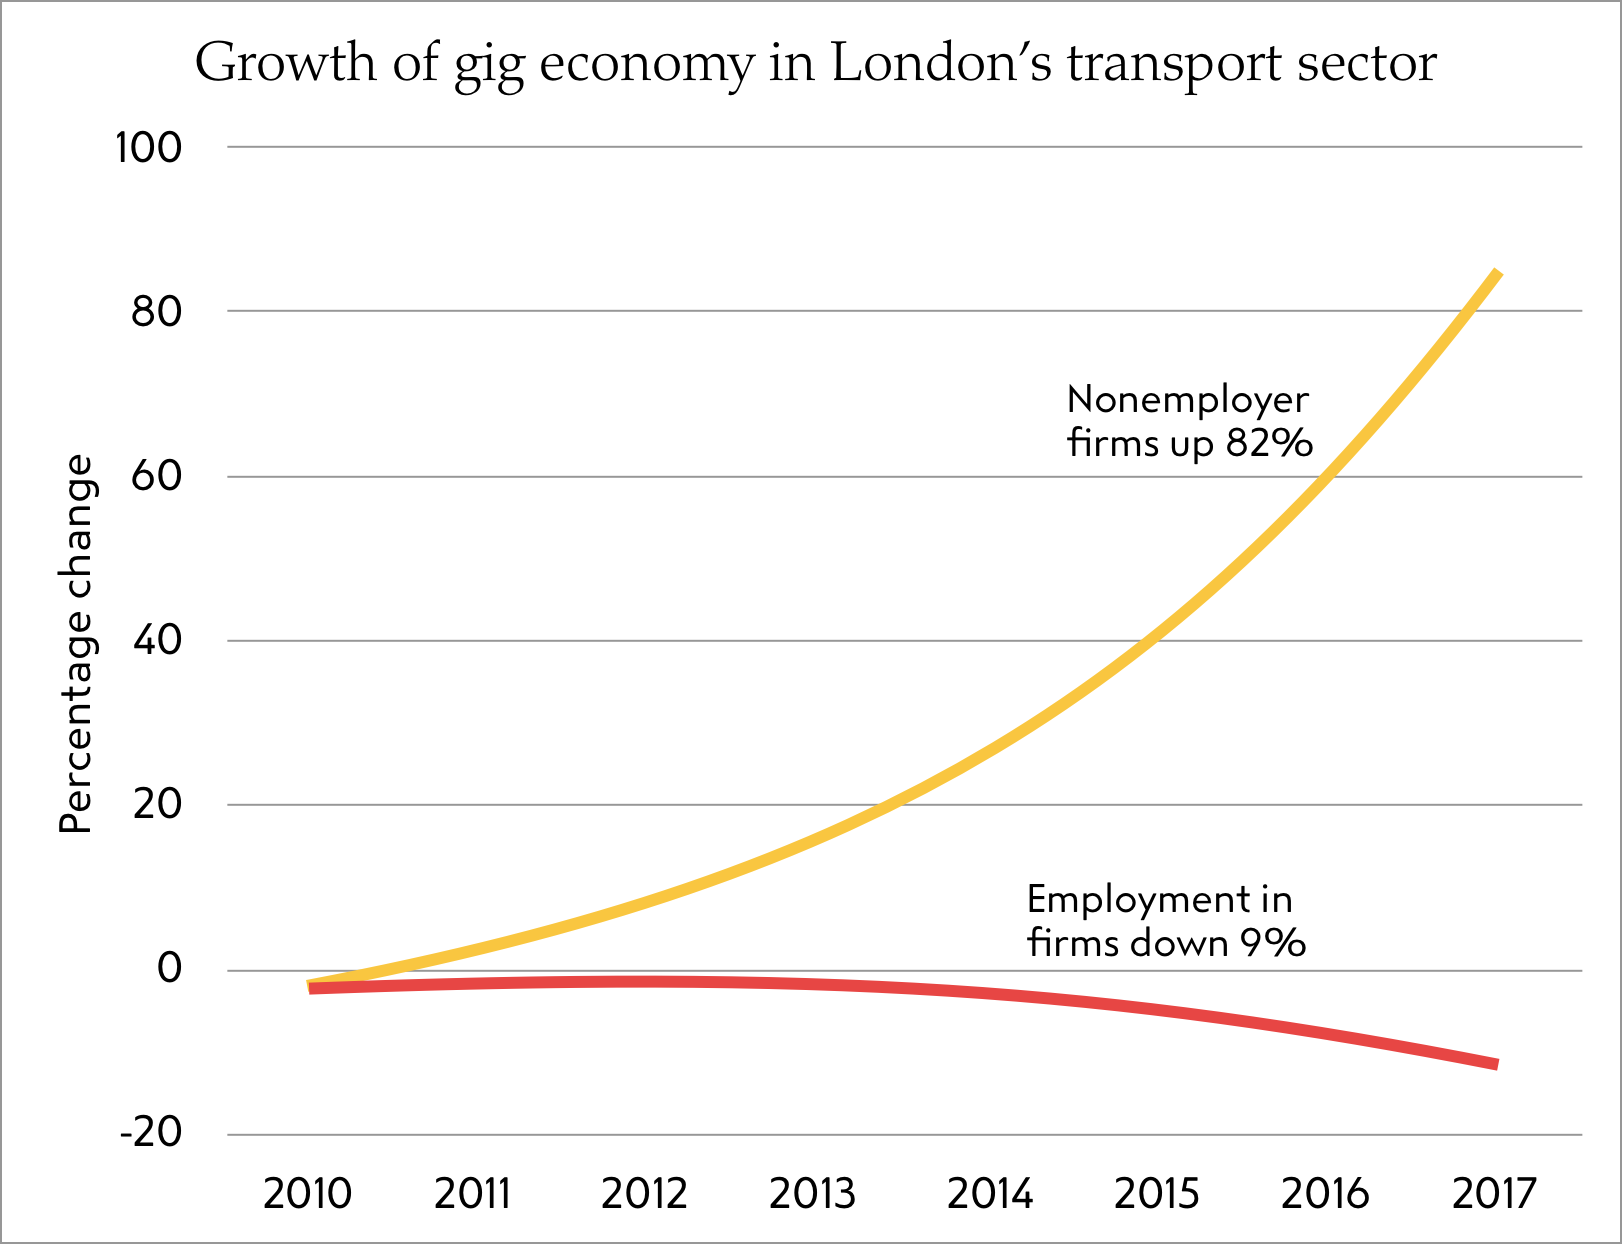 New research: London’s transport gig economy grows by 82% since 2010